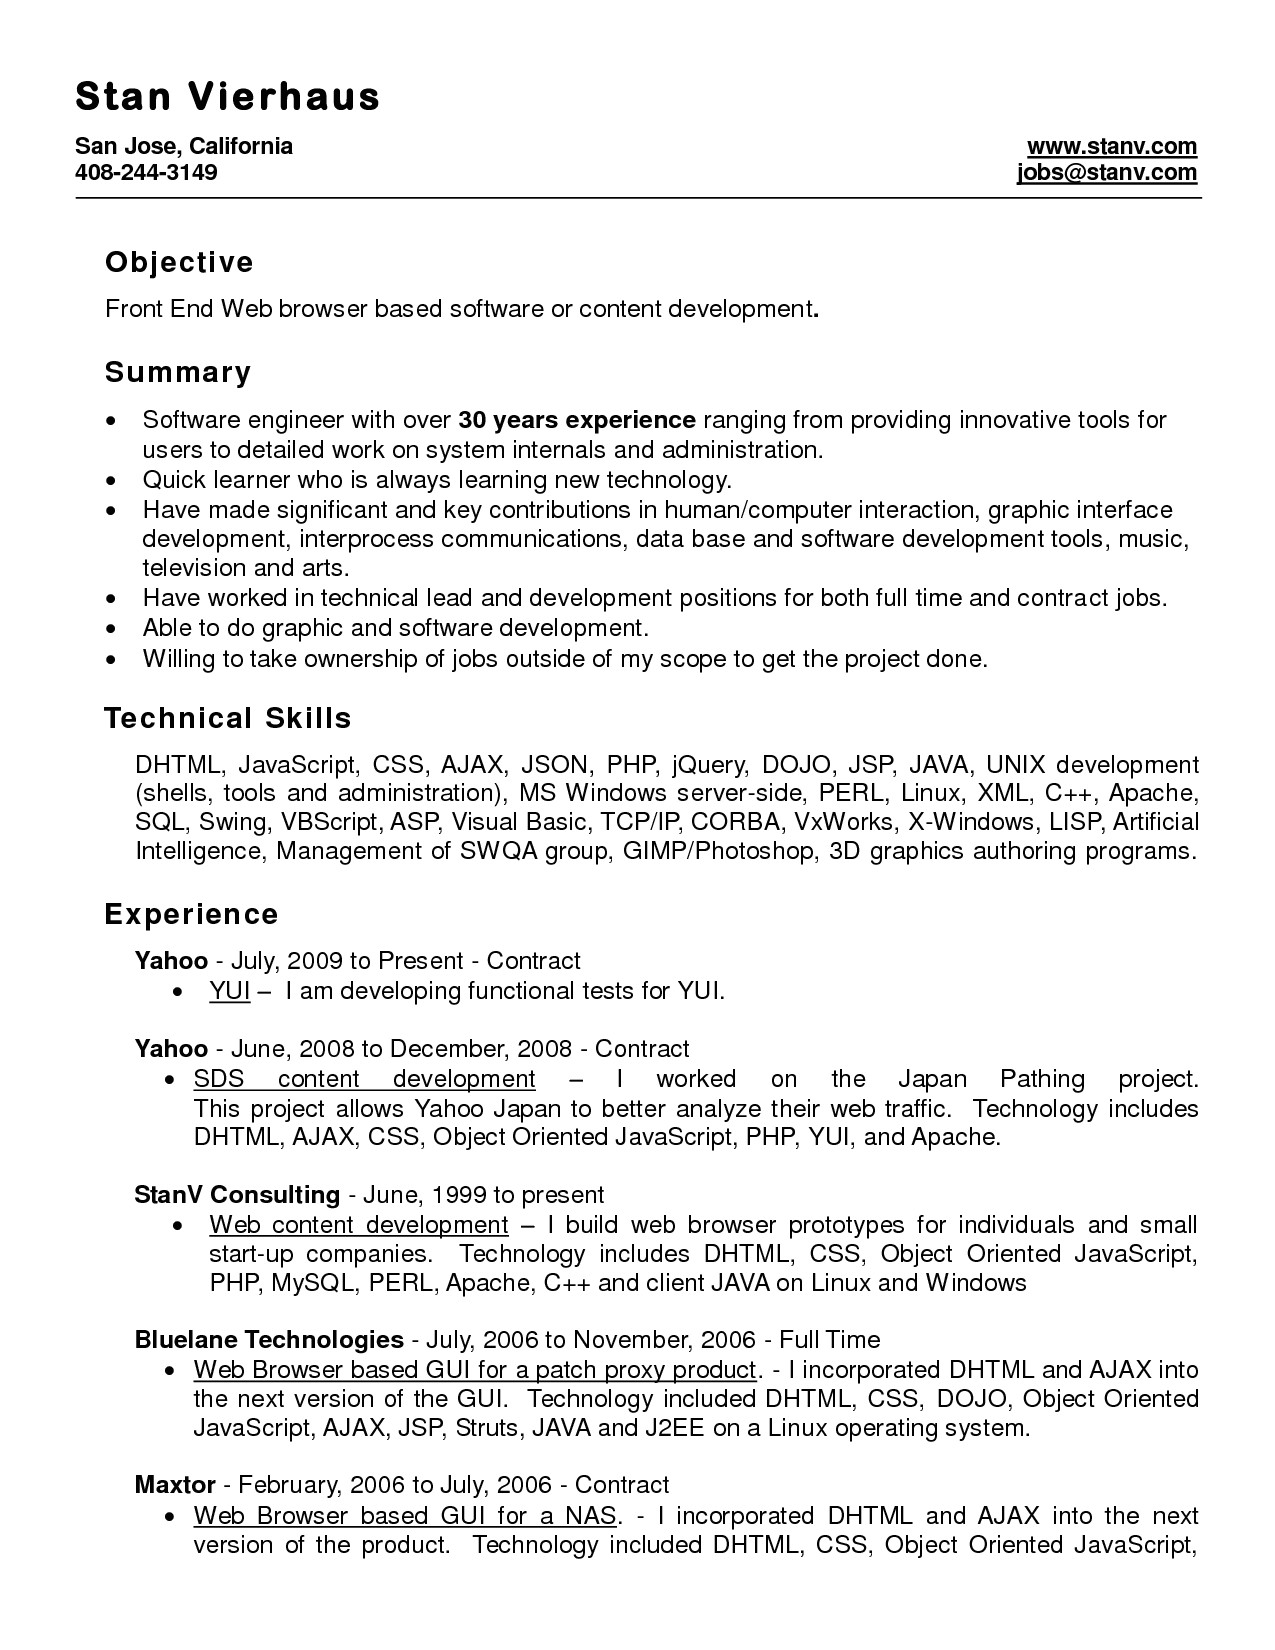 resume examples how to find templates on microsoft word get 2007 office 2010 template pics ms format document